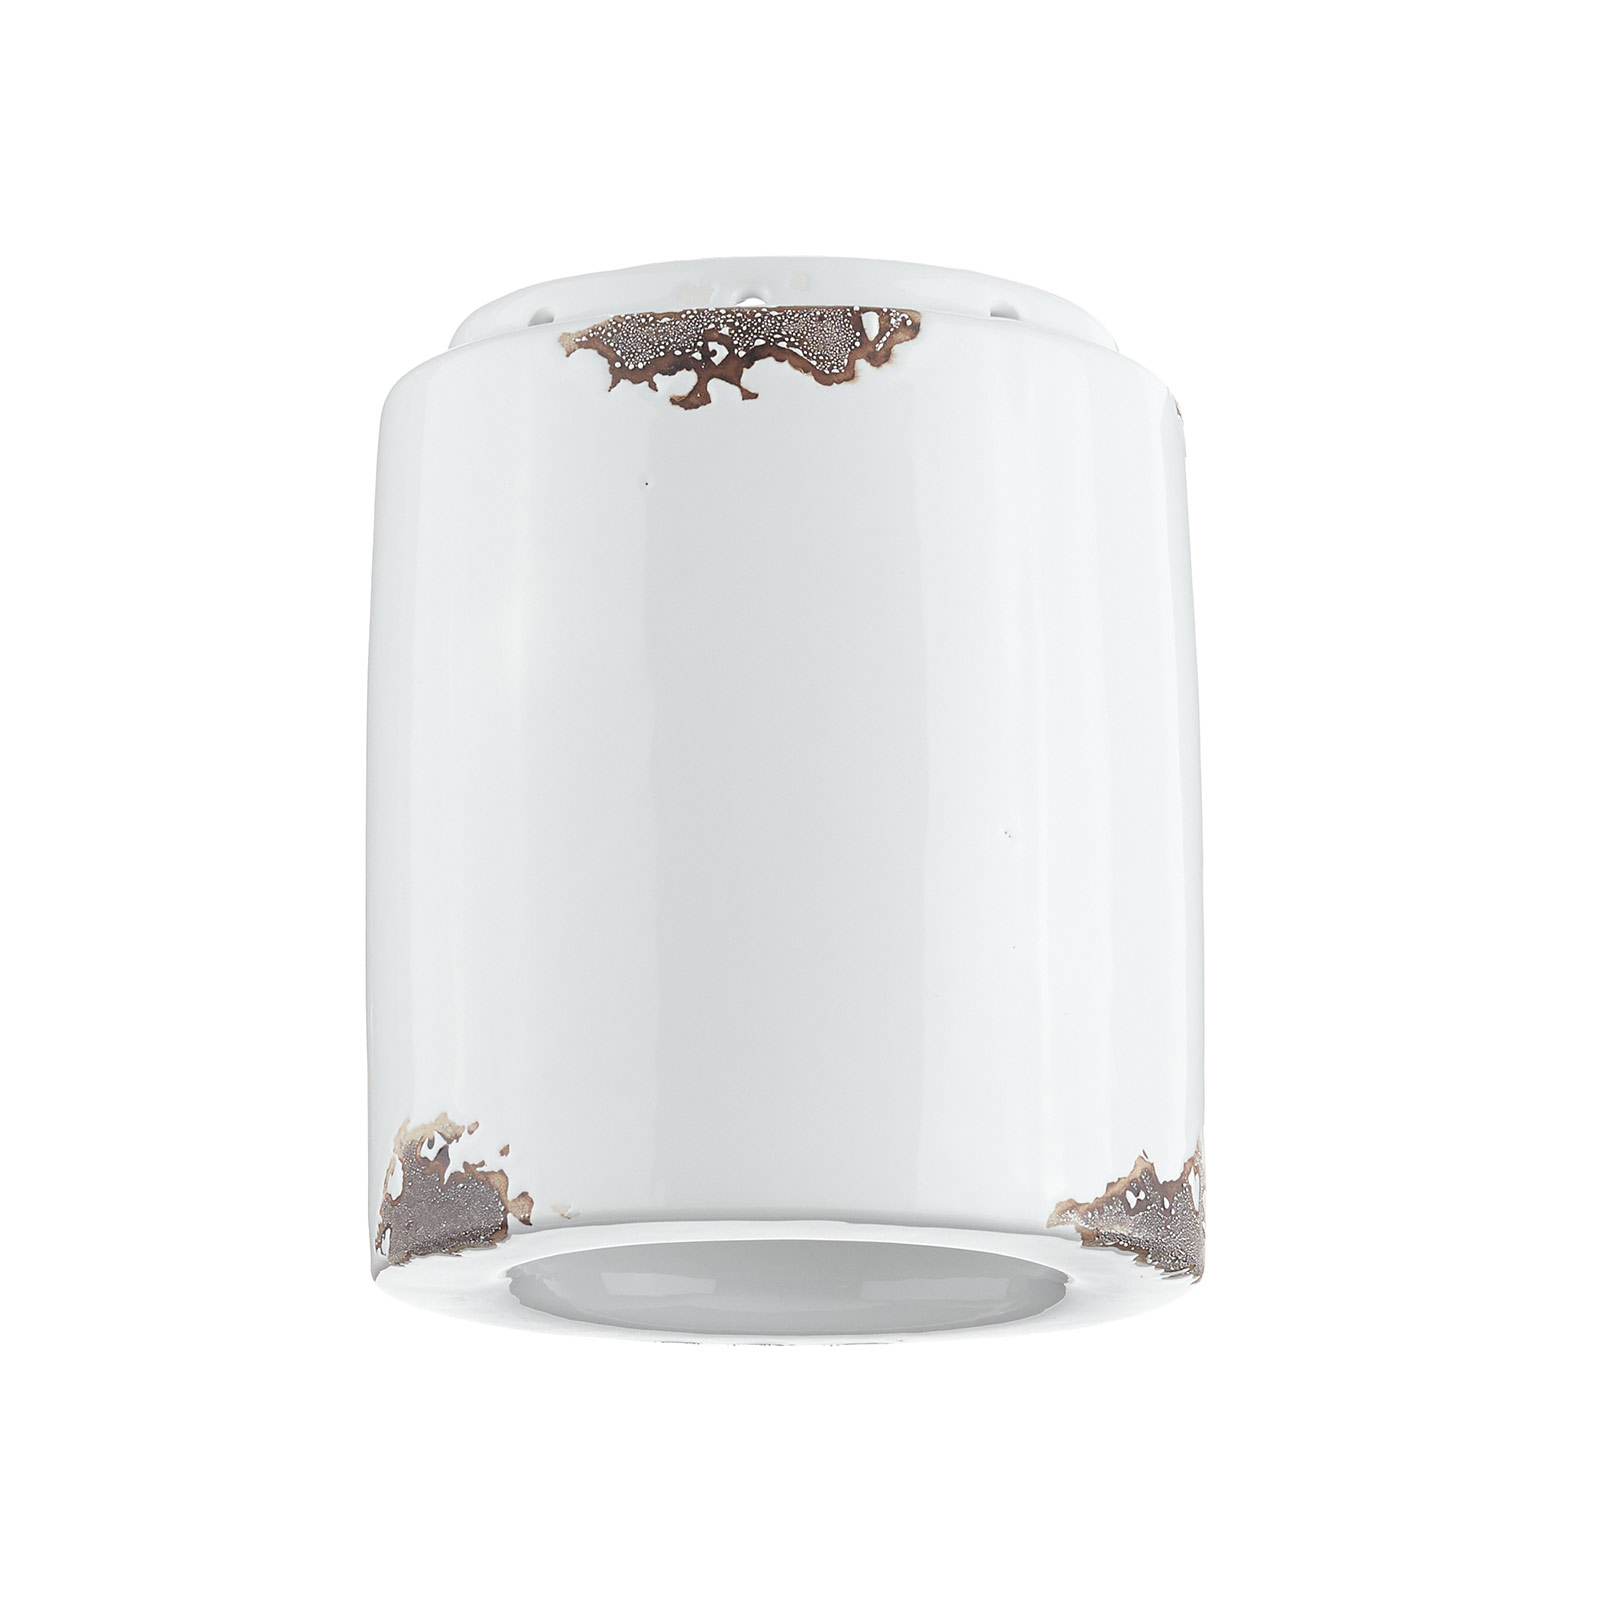 C986 ceiling light in a vintage style, white